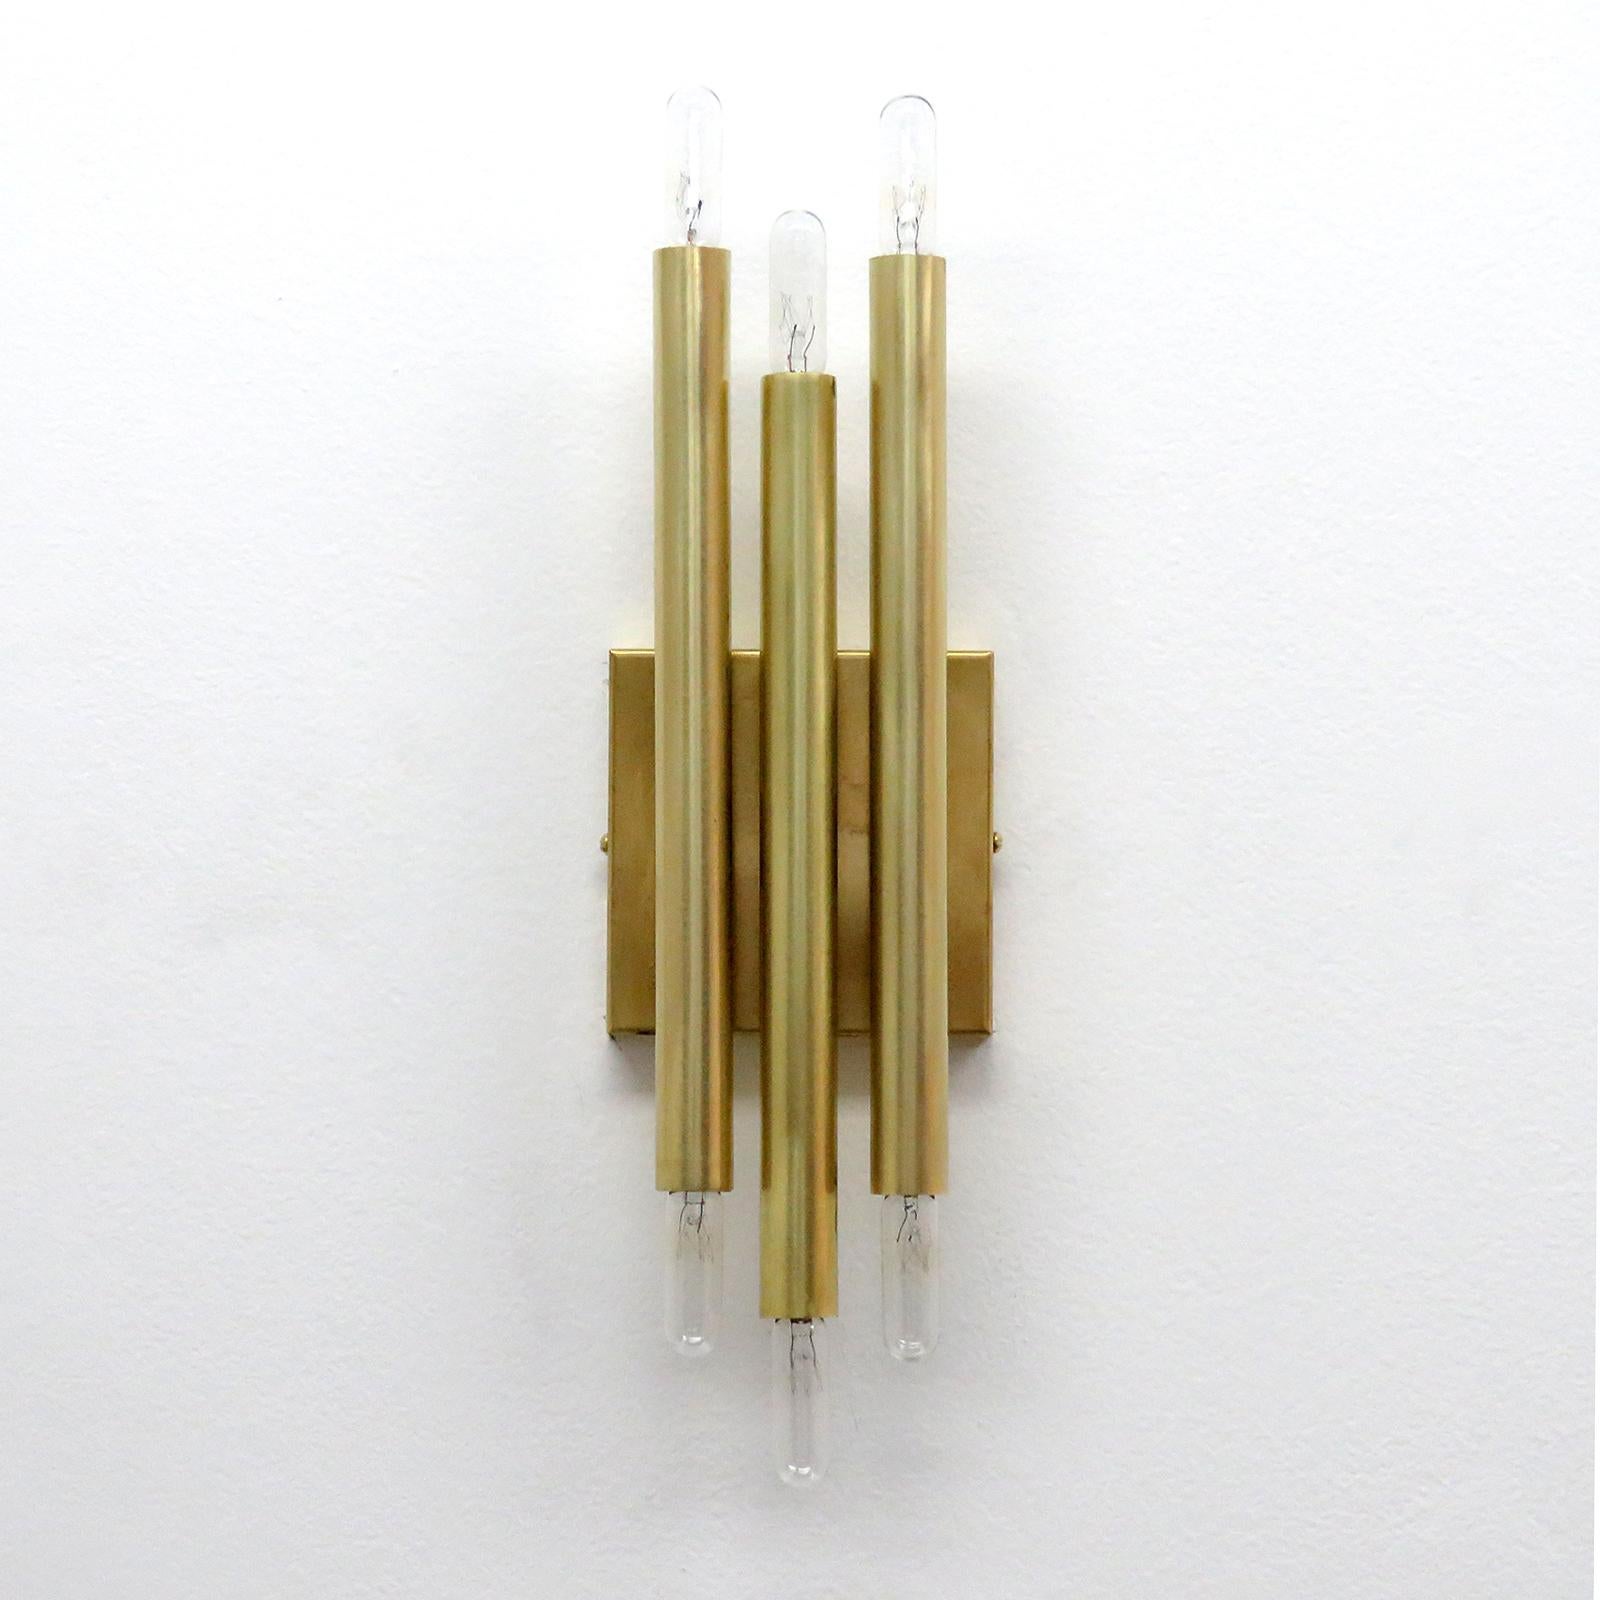 Great pair of raw brass geometric wall lights by Gallery L7, manufactured and hand finished in Los Angeles, with three brass double candles that can be mounted vertically or horizontally. Six E12 candelabra sockets per fixture, max. wattage 40w each